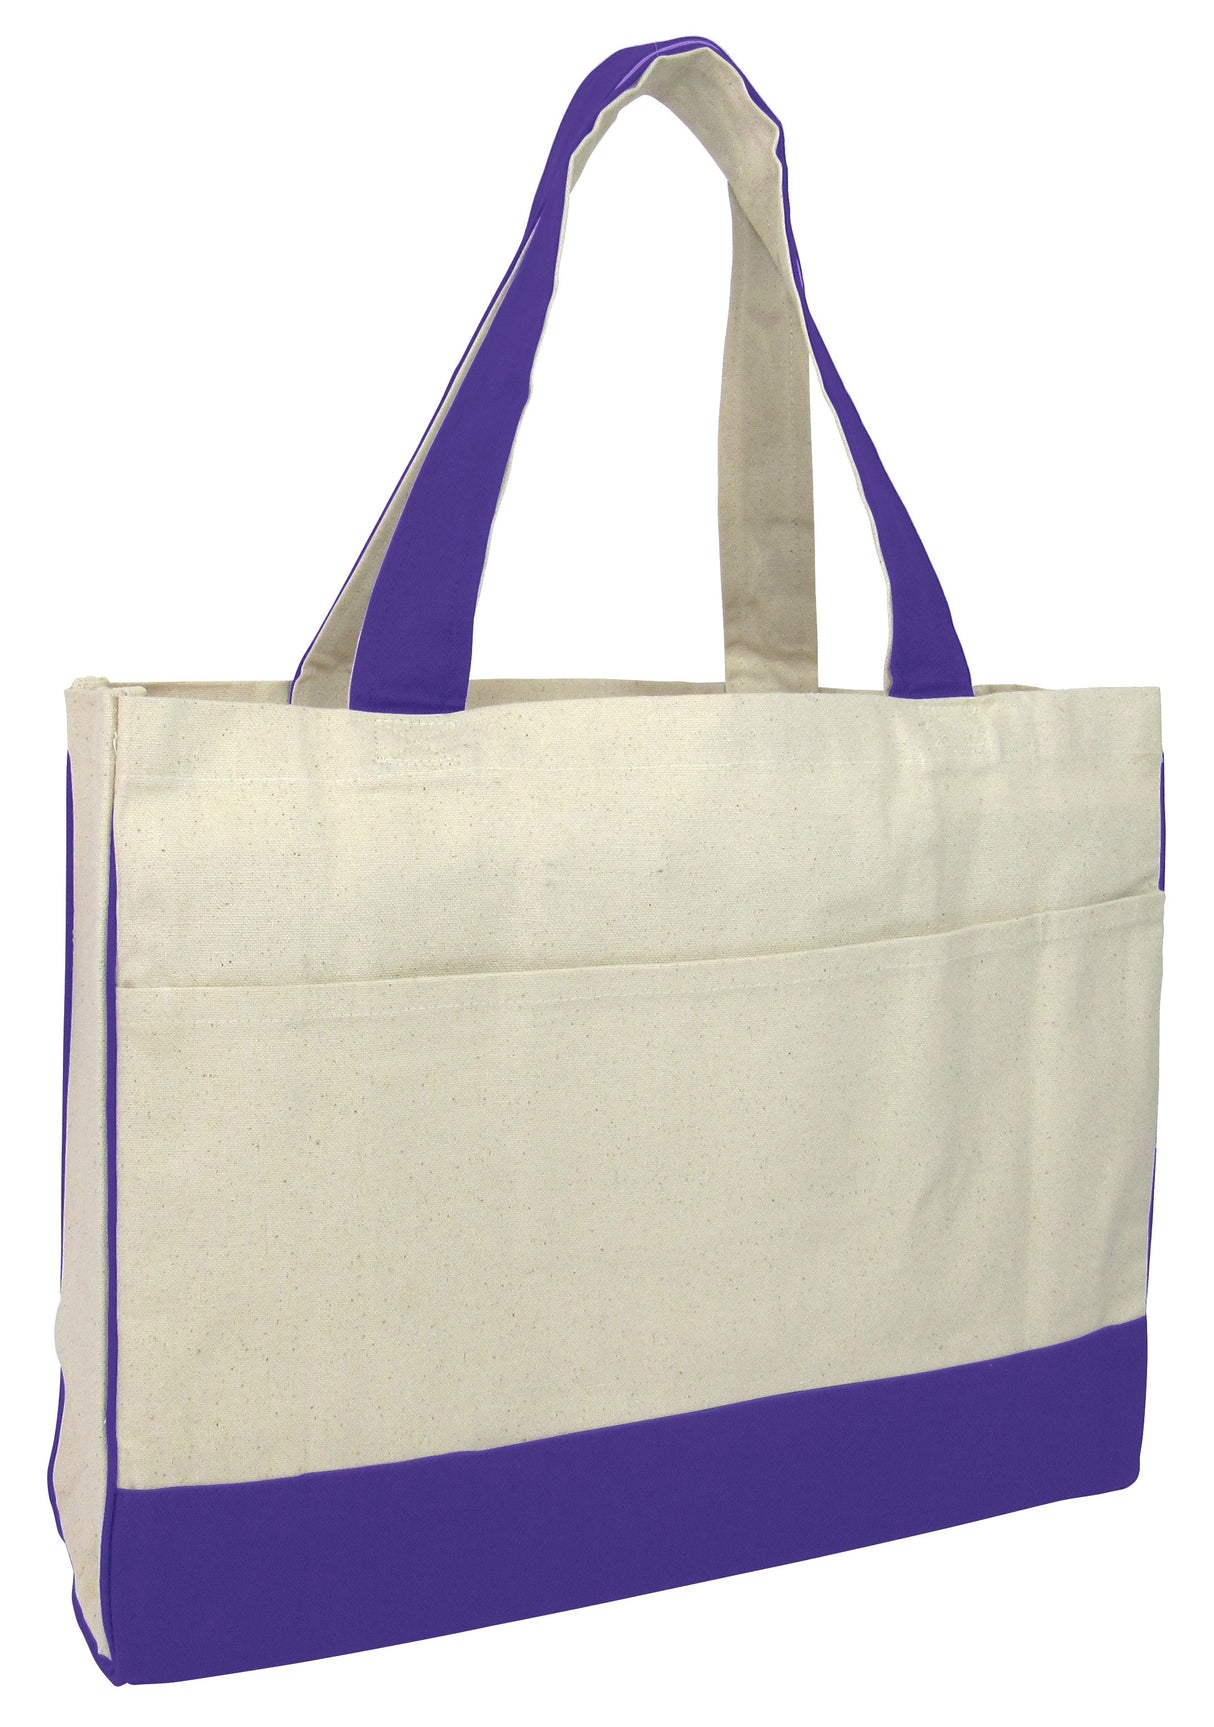 48 ct Cotton Canvas Tote Bag with Inside Zipper Pocket - By Case